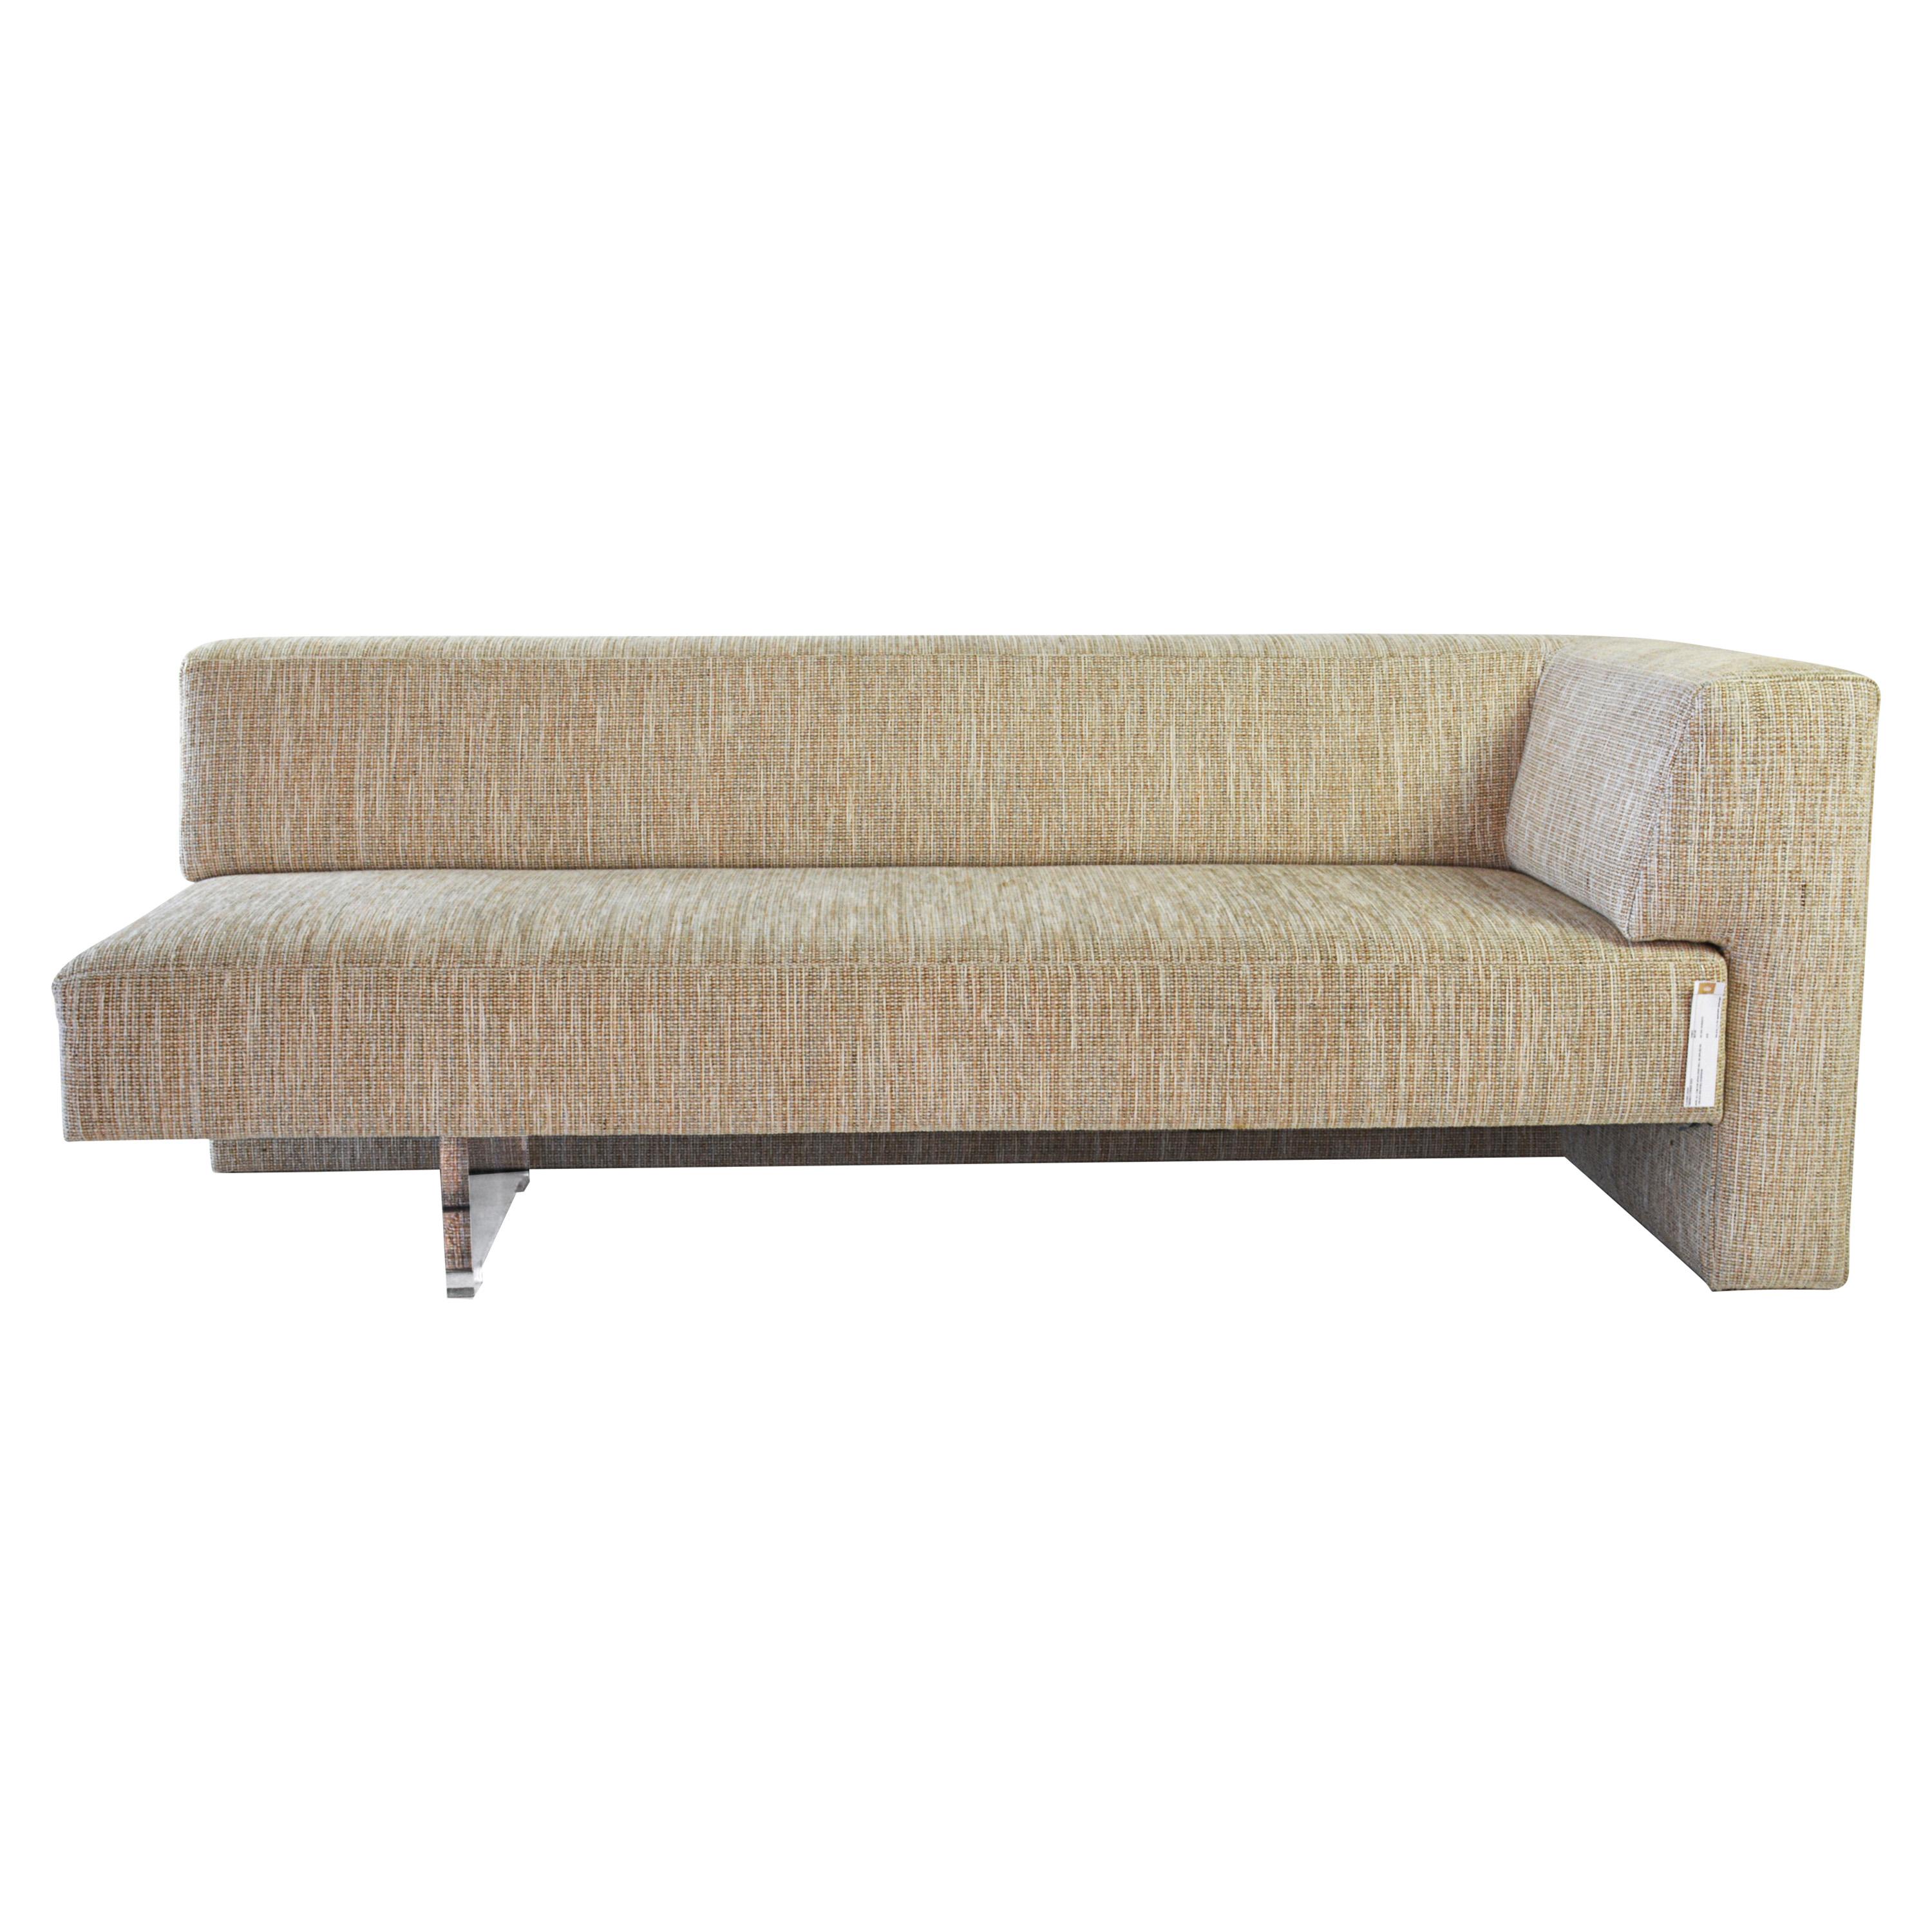 Vladimir Kagan Omnibus I One Arm Sofa in Upholstered Seat with Lucite Base